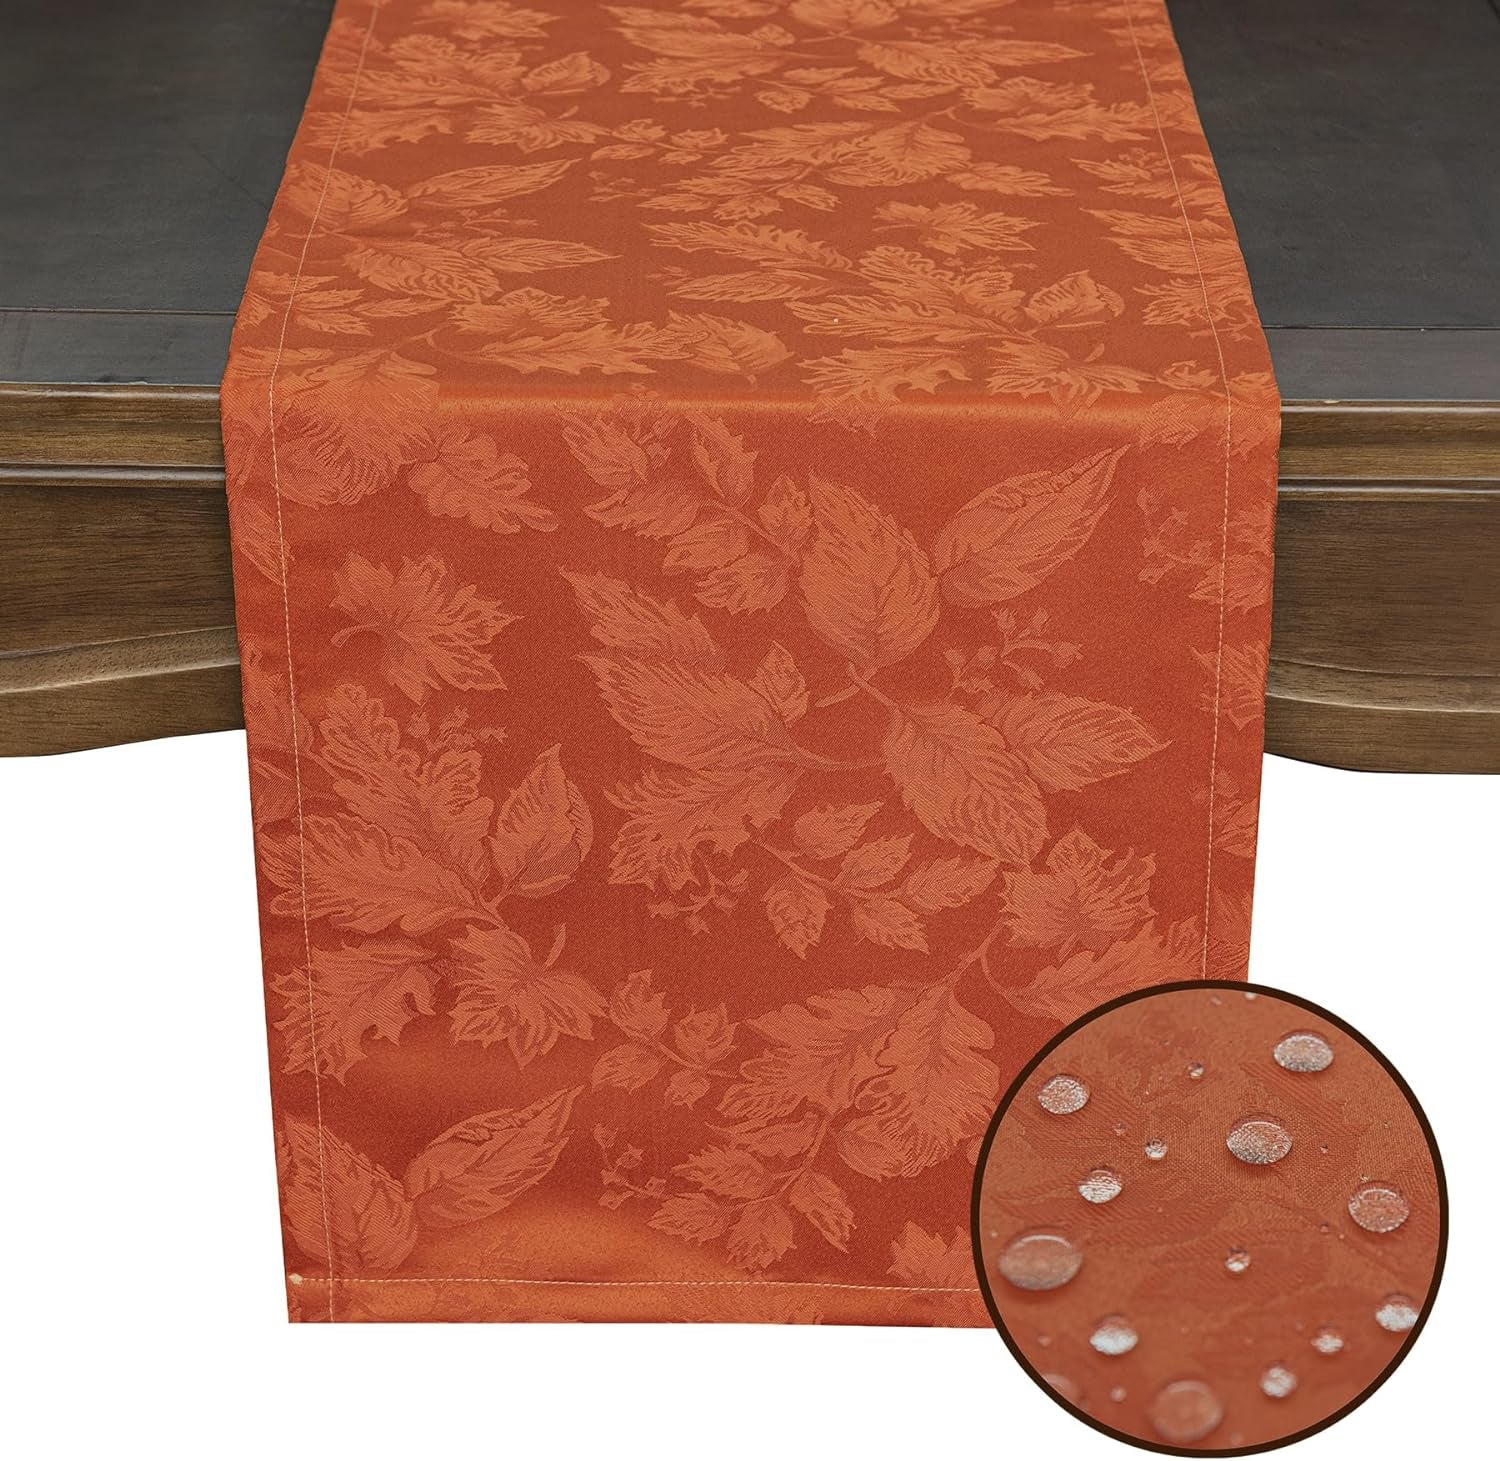 Joyfol Day Jacquard Autumn Table Runner,Fall Countryside Leaves Thanksgiving Table Runners,Waterproof Kitchen Dining Harvest Holiday Tabletop Decoration(14X36 Inch,Rust/Burnt Orange)